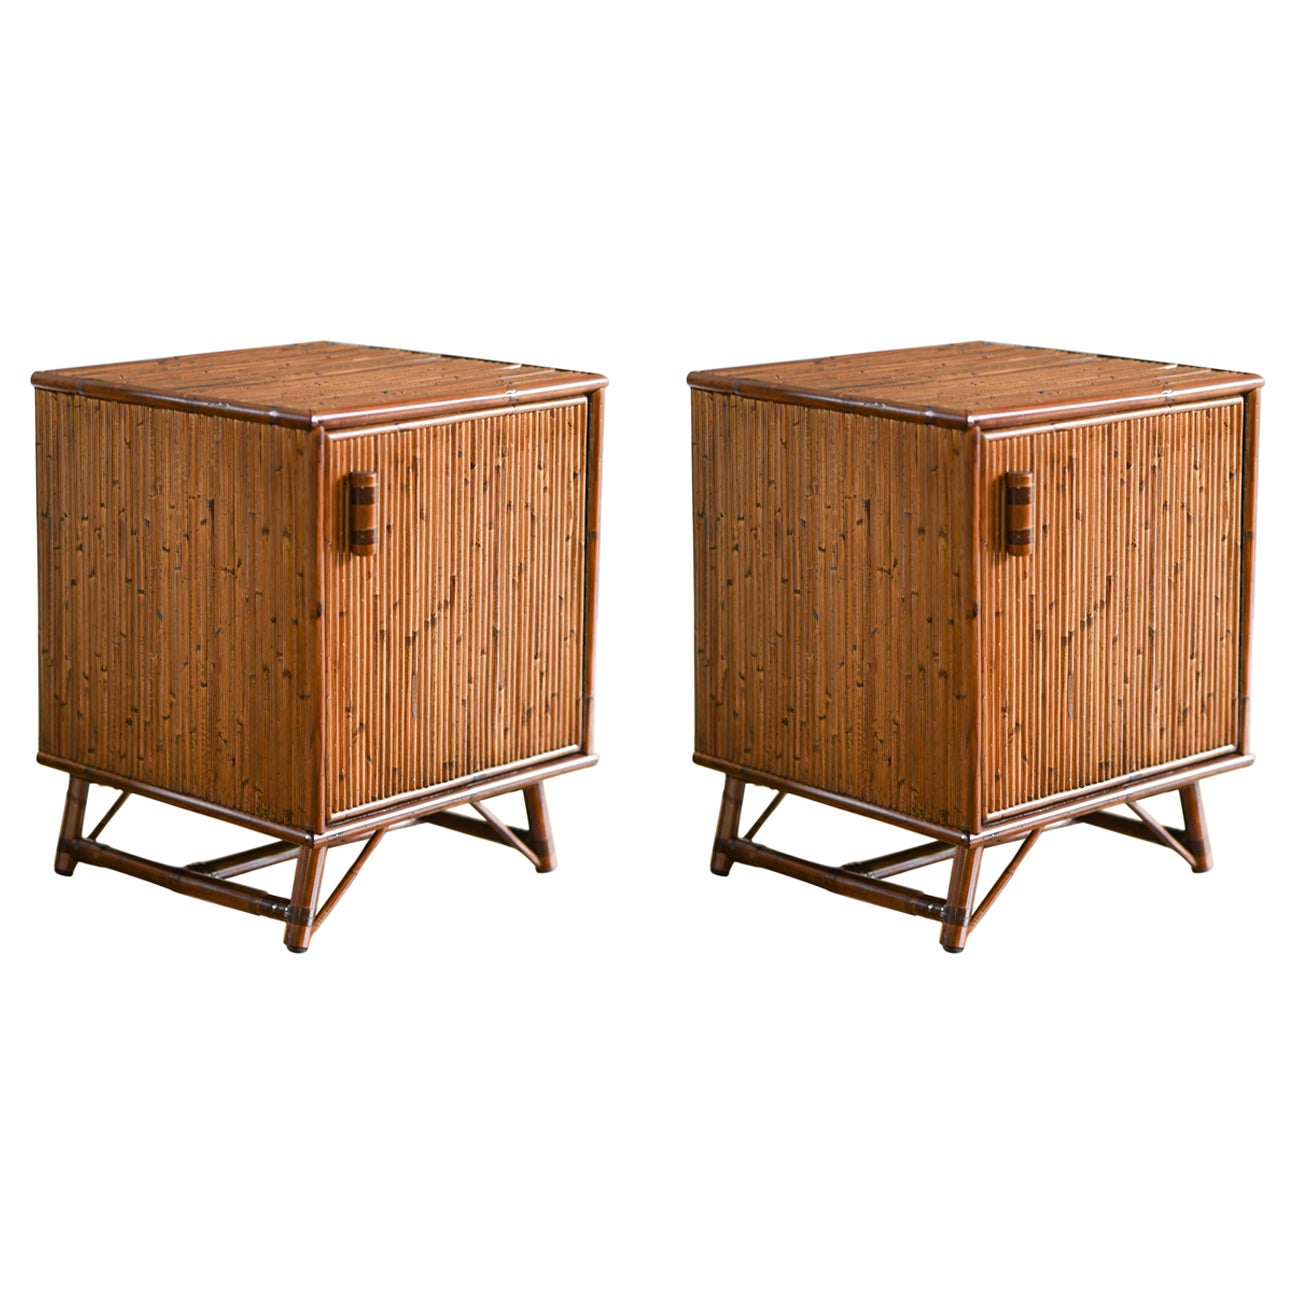 Pair of Bamboo Bedside Tables with Doors and Leather Bindings 'Set of 2' For Sale